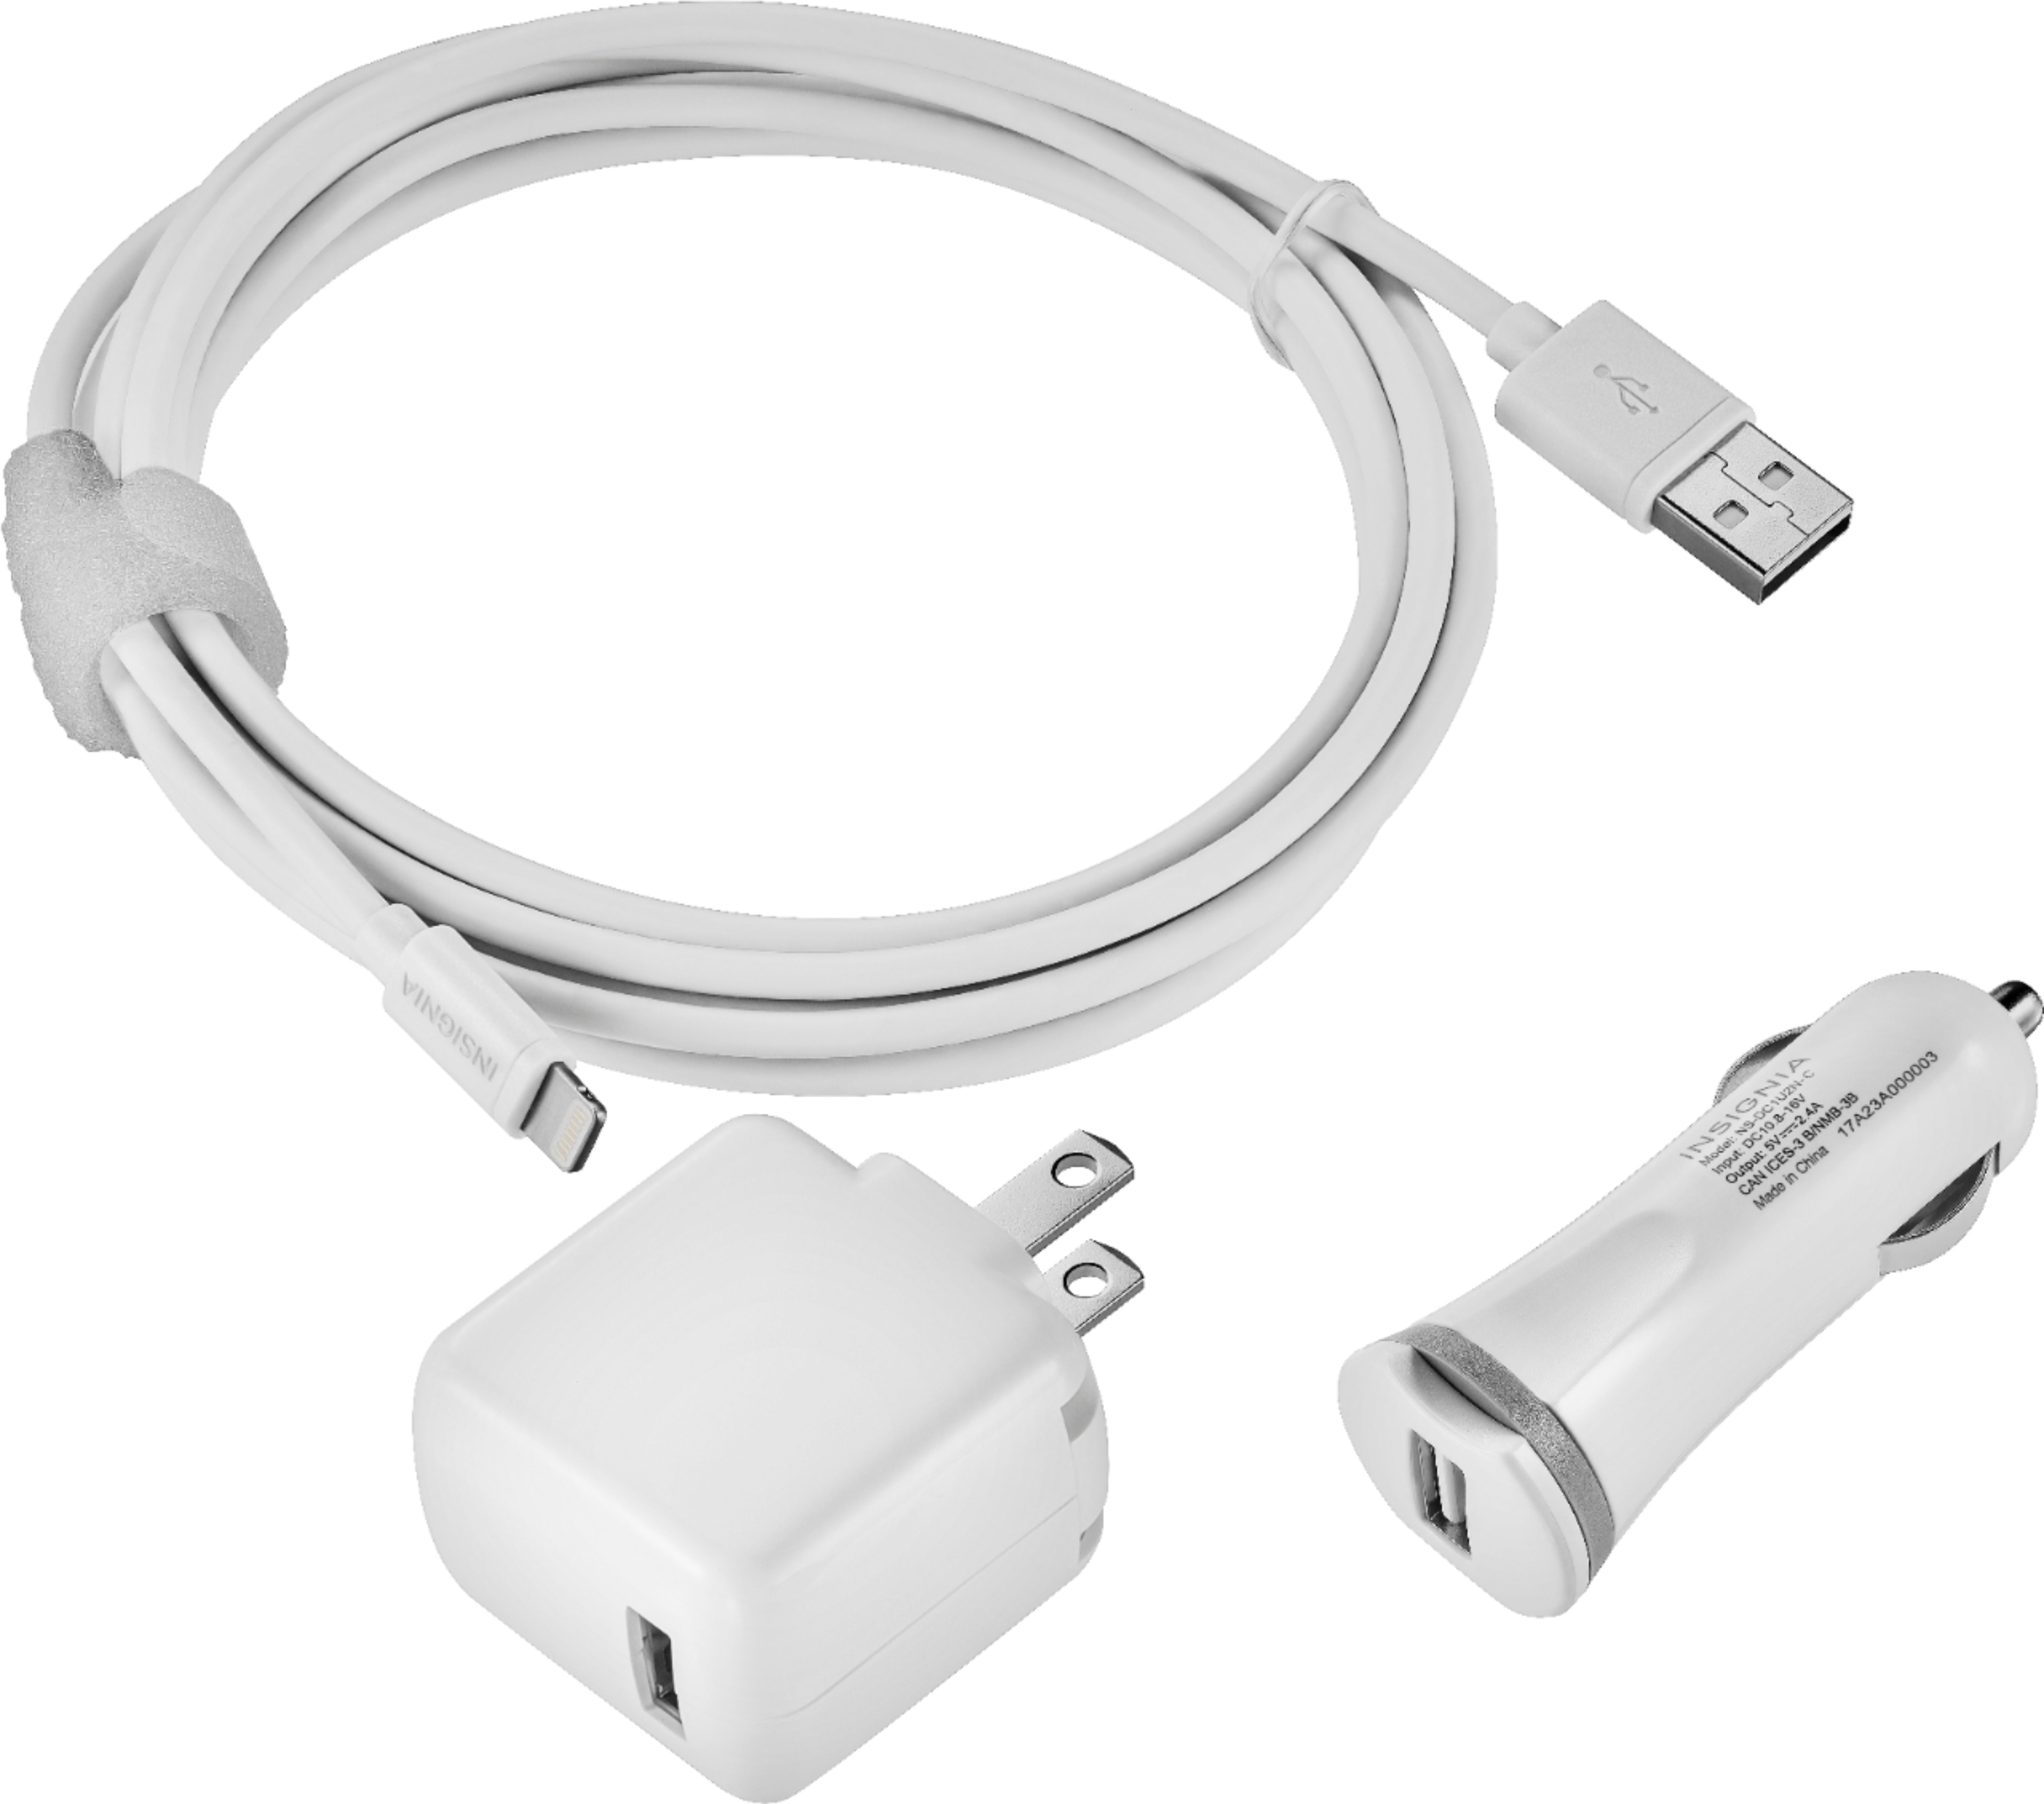 10' Lightning Charge-and-Sync Cable Kit White NS-MI7K10 - Best Buy